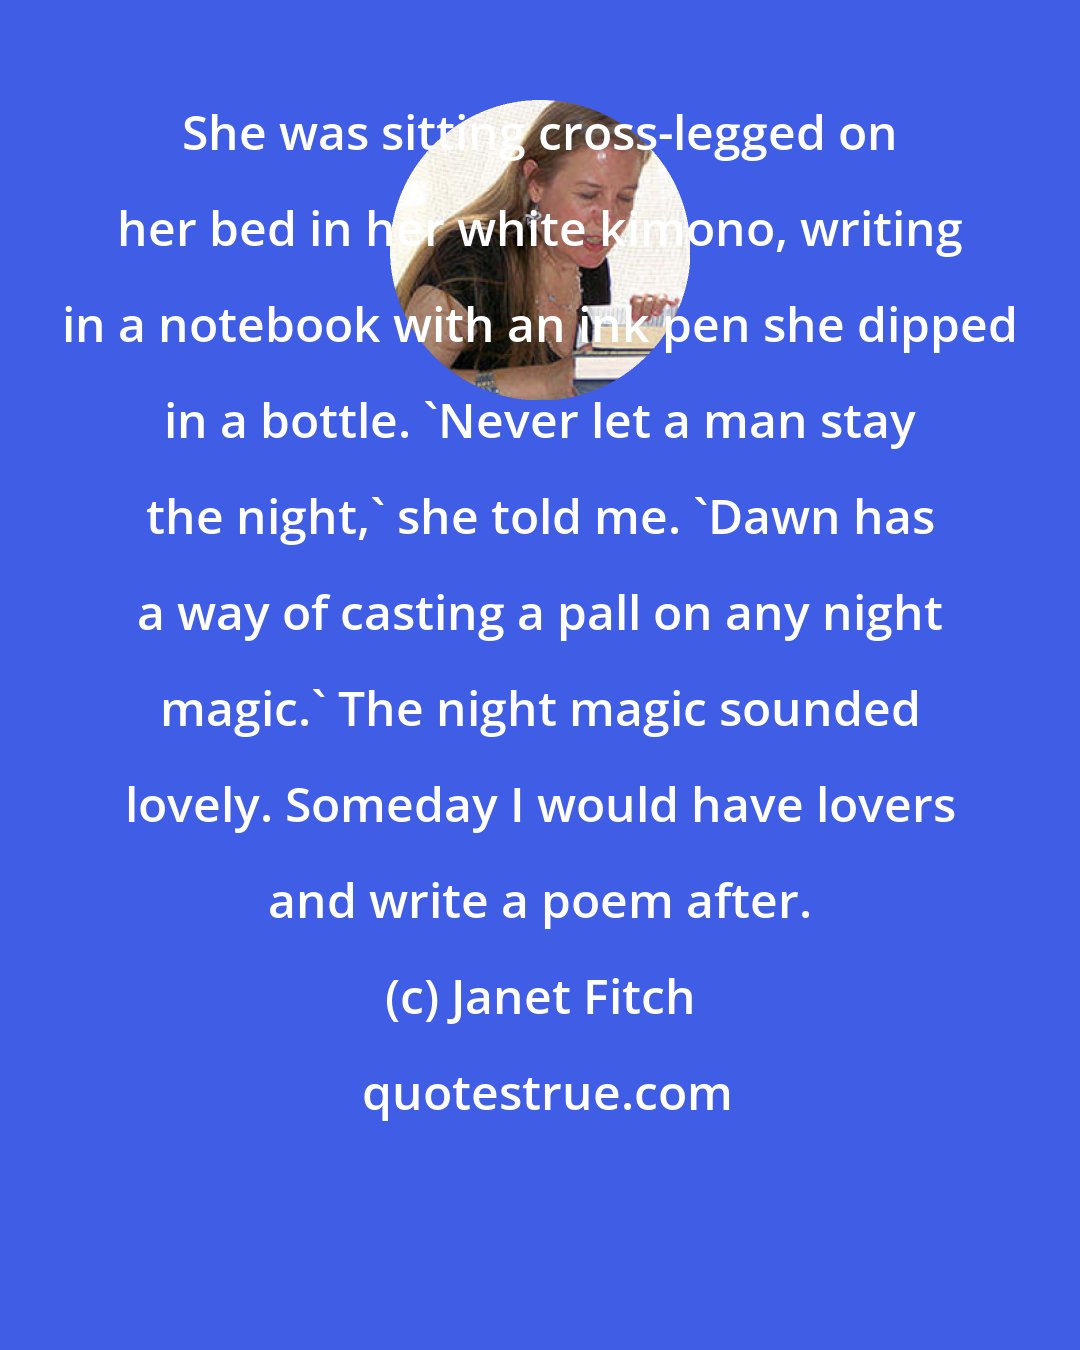 Janet Fitch: She was sitting cross-legged on her bed in her white kimono, writing in a notebook with an ink pen she dipped in a bottle. 'Never let a man stay the night,' she told me. 'Dawn has a way of casting a pall on any night magic.' The night magic sounded lovely. Someday I would have lovers and write a poem after.